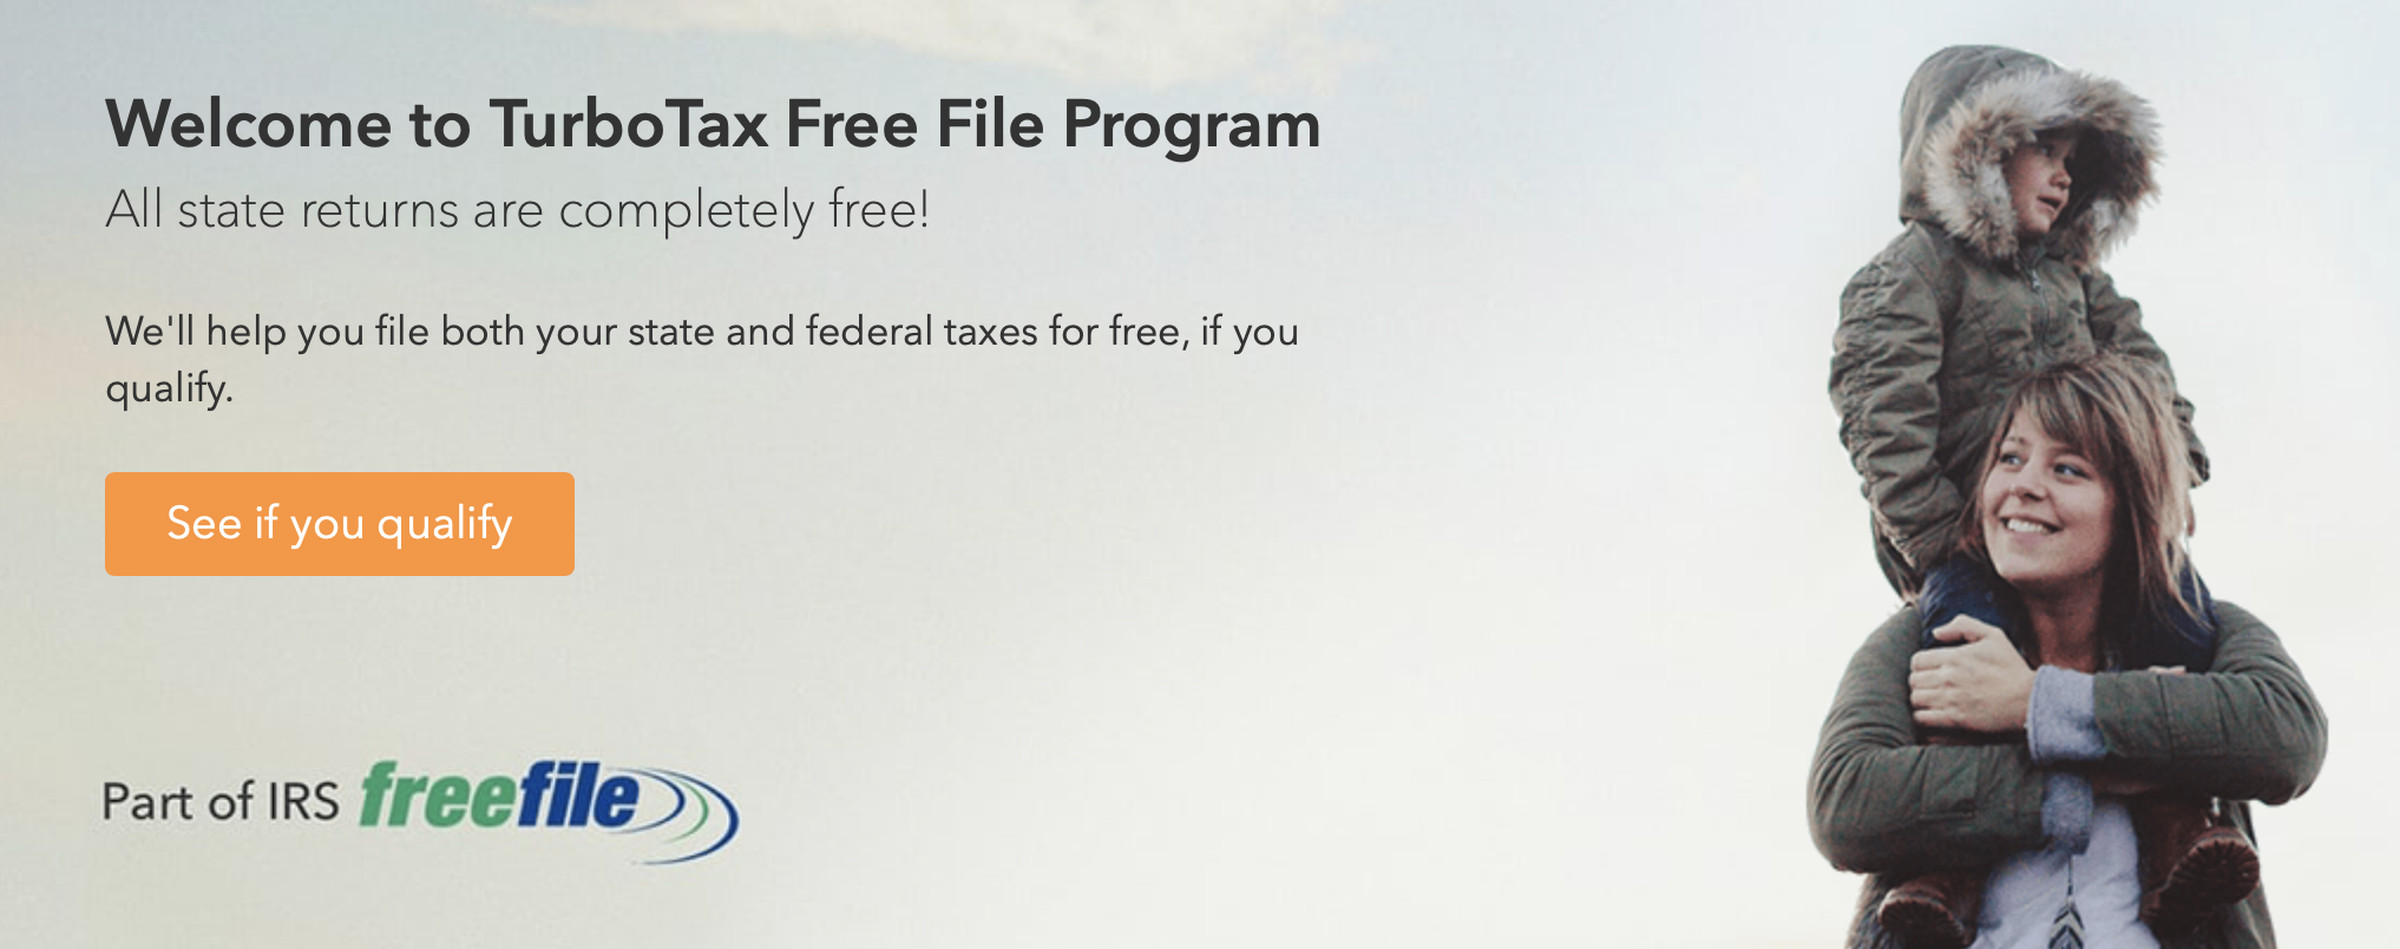 The Free File option is legitimately free, but TurboTax is seemingly trying to make it harder to find.